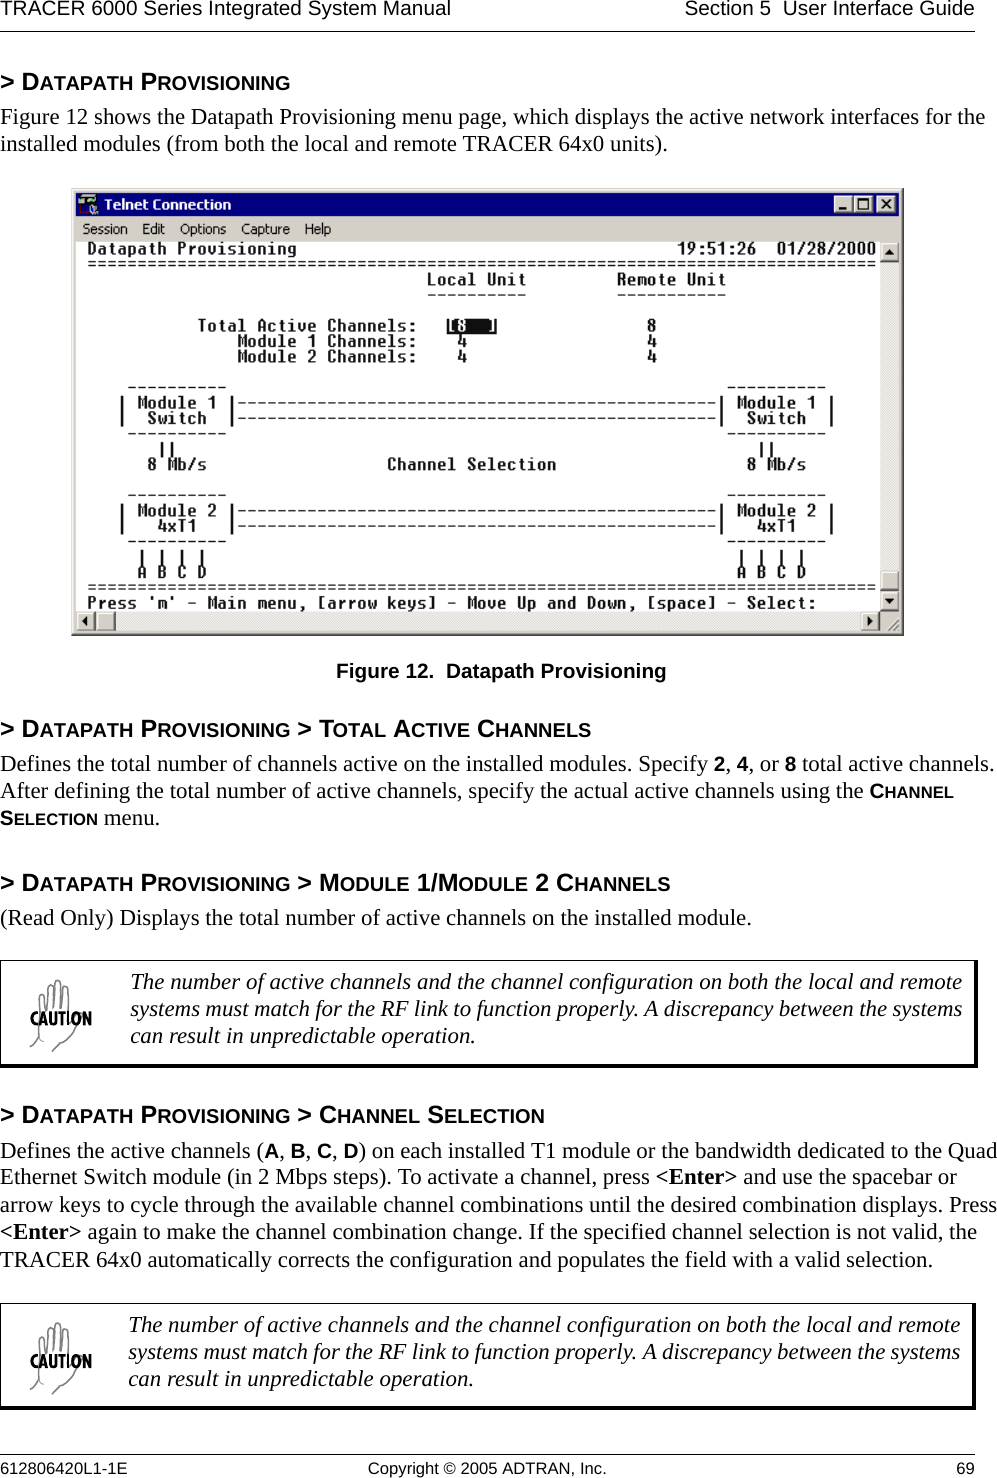 TRACER 6000 Series Integrated System Manual Section 5  User Interface Guide612806420L1-1E Copyright © 2005 ADTRAN, Inc. 69&gt; DATAPATH PROVISIONINGFigure 12 shows the Datapath Provisioning menu page, which displays the active network interfaces for the installed modules (from both the local and remote TRACER 64x0 units). Figure 12.  Datapath Provisioning&gt; DATAPATH PROVISIONING &gt; TOTAL ACTIVE CHANNELSDefines the total number of channels active on the installed modules. Specify 2, 4, or 8 total active channels. After defining the total number of active channels, specify the actual active channels using the CHANNEL SELECTION menu.&gt; DATAPATH PROVISIONING &gt; MODULE 1/MODULE 2 CHANNELS(Read Only) Displays the total number of active channels on the installed module.&gt; DATAPATH PROVISIONING &gt; CHANNEL SELECTIONDefines the active channels (A, B, C, D) on each installed T1 module or the bandwidth dedicated to the Quad Ethernet Switch module (in 2 Mbps steps). To activate a channel, press &lt;Enter&gt; and use the spacebar or arrow keys to cycle through the available channel combinations until the desired combination displays. Press &lt;Enter&gt; again to make the channel combination change. If the specified channel selection is not valid, the TRACER 64x0 automatically corrects the configuration and populates the field with a valid selection.The number of active channels and the channel configuration on both the local and remote systems must match for the RF link to function properly. A discrepancy between the systems can result in unpredictable operation.The number of active channels and the channel configuration on both the local and remote systems must match for the RF link to function properly. A discrepancy between the systems can result in unpredictable operation.